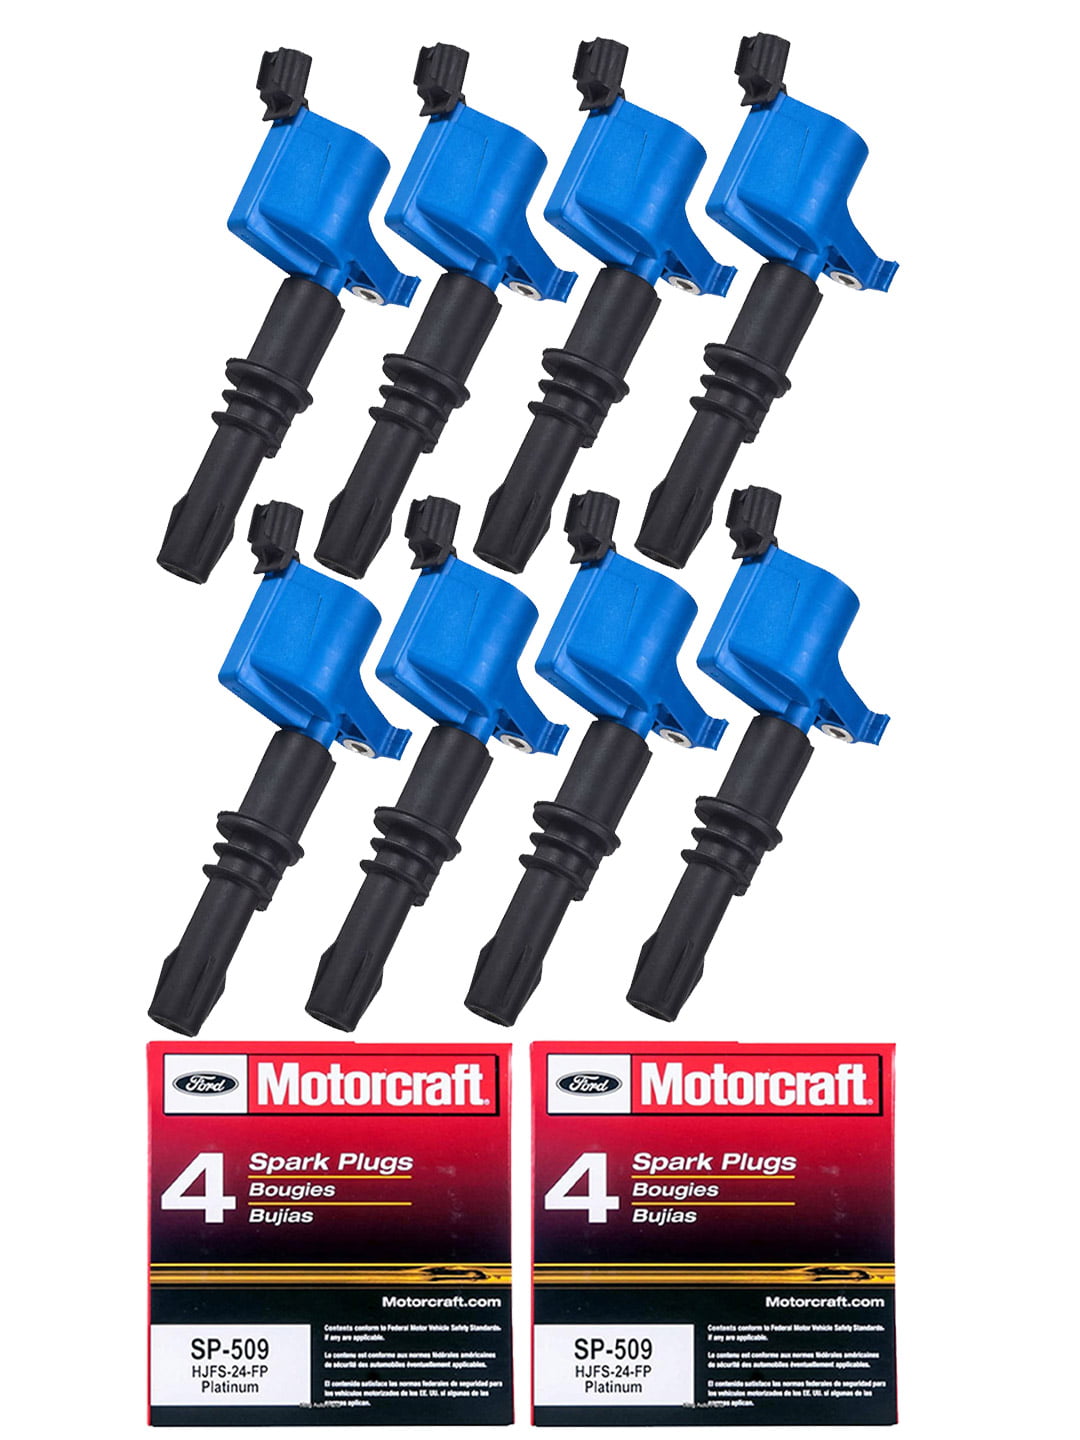 Motorcraft Spark Plug For 1999-2000 Ford F150 New Ignition Coil 1 1 +